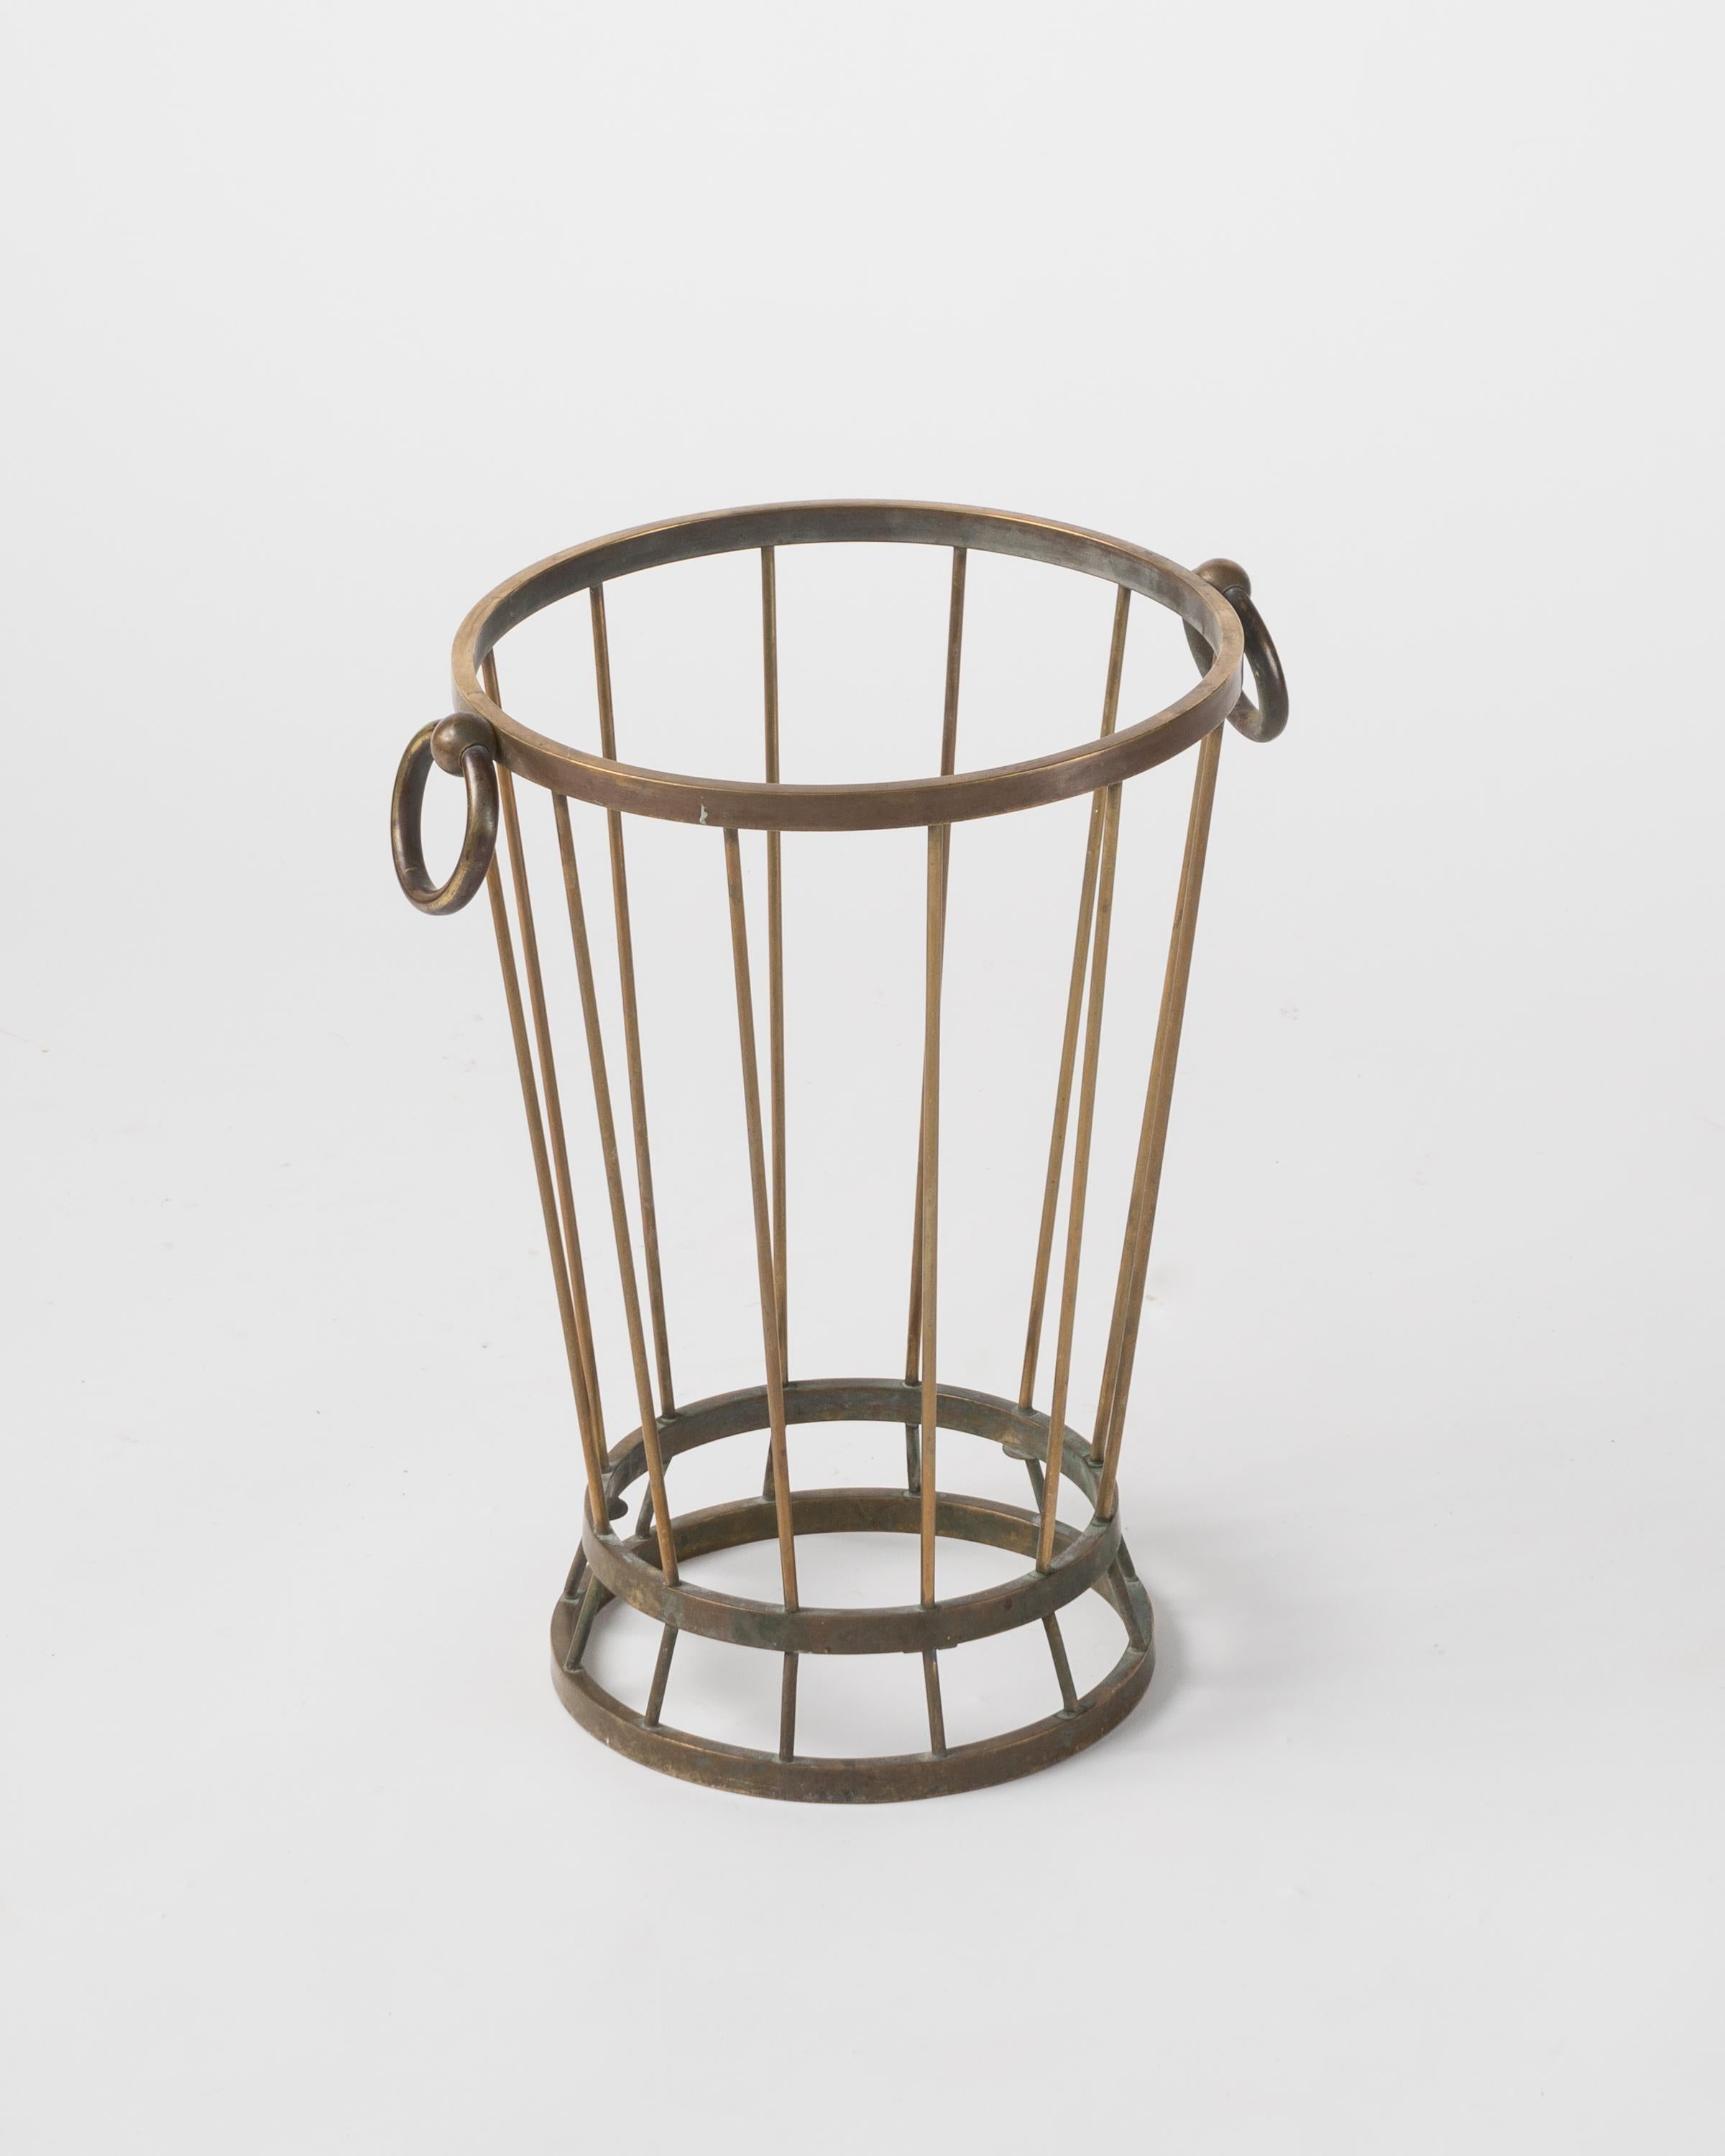 Mid-20th Century Modernist Patinated Brass Umbrella Stand - France, 1950's For Sale